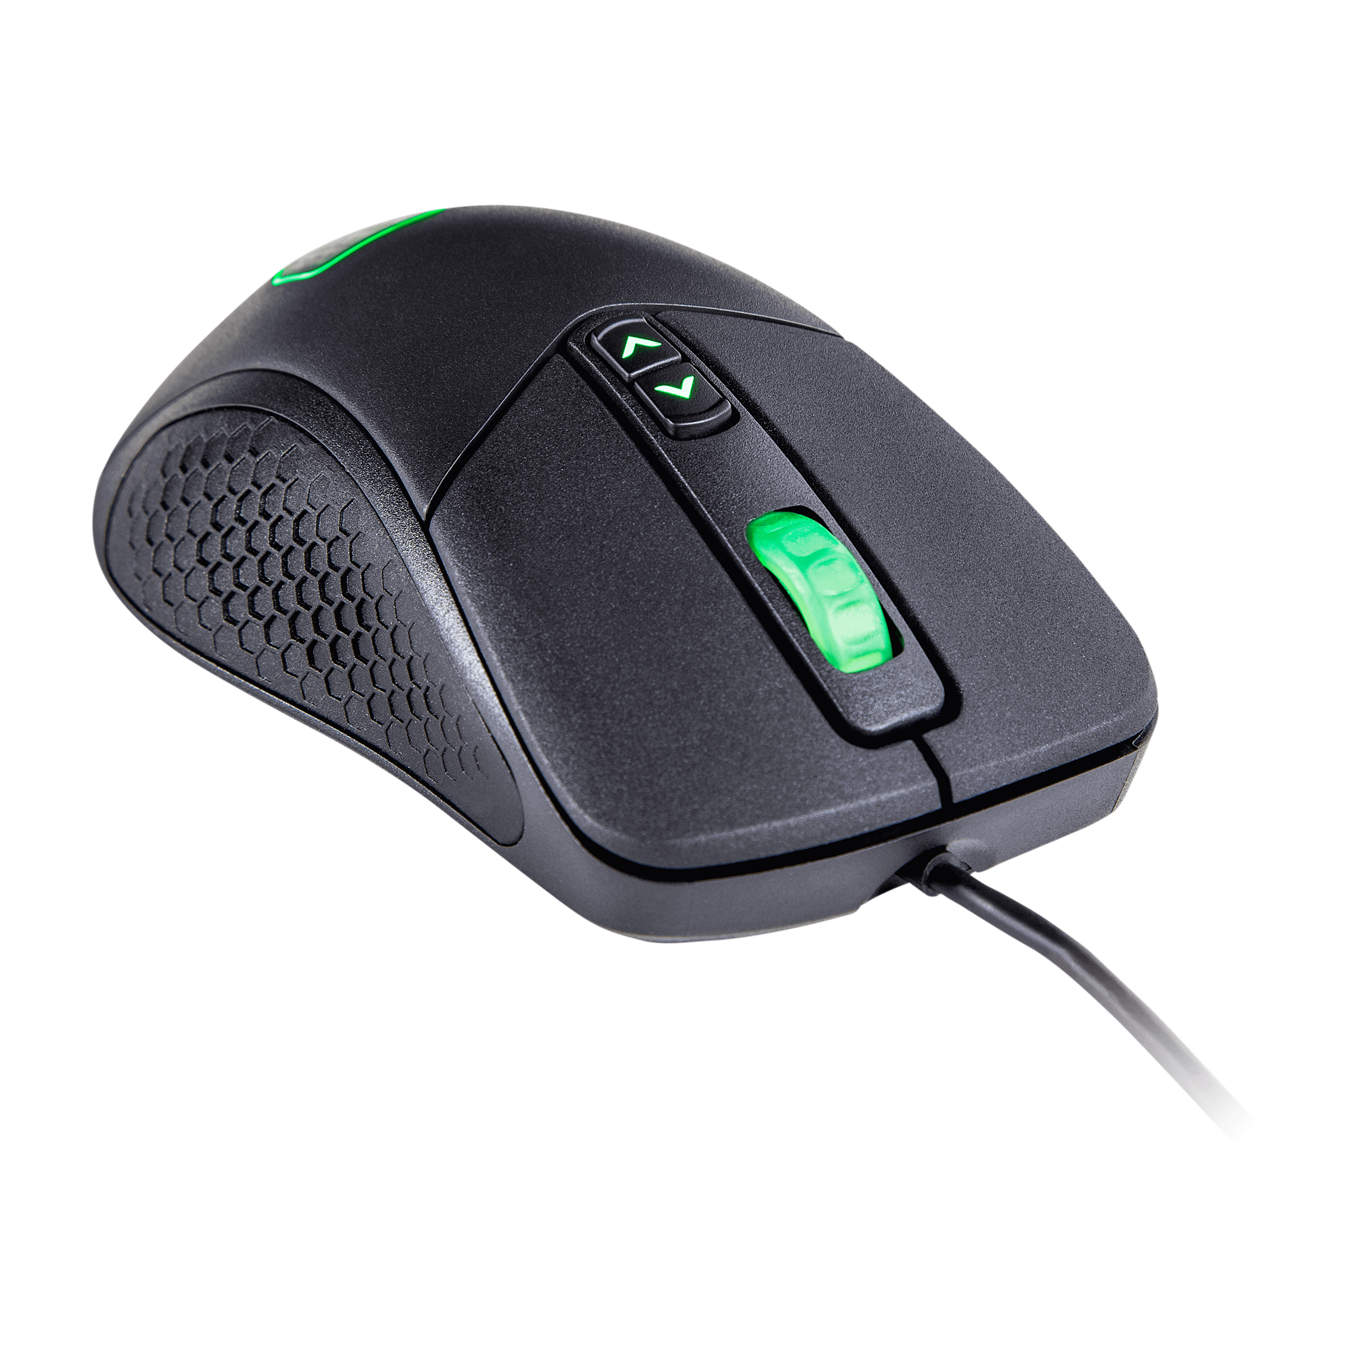 MasterMouse MM530 Gaming Mouse - Ergonomic Right handed design inspired by classics and successor of CM Storm Mizar and Alcor perfectly contoured for comfort.